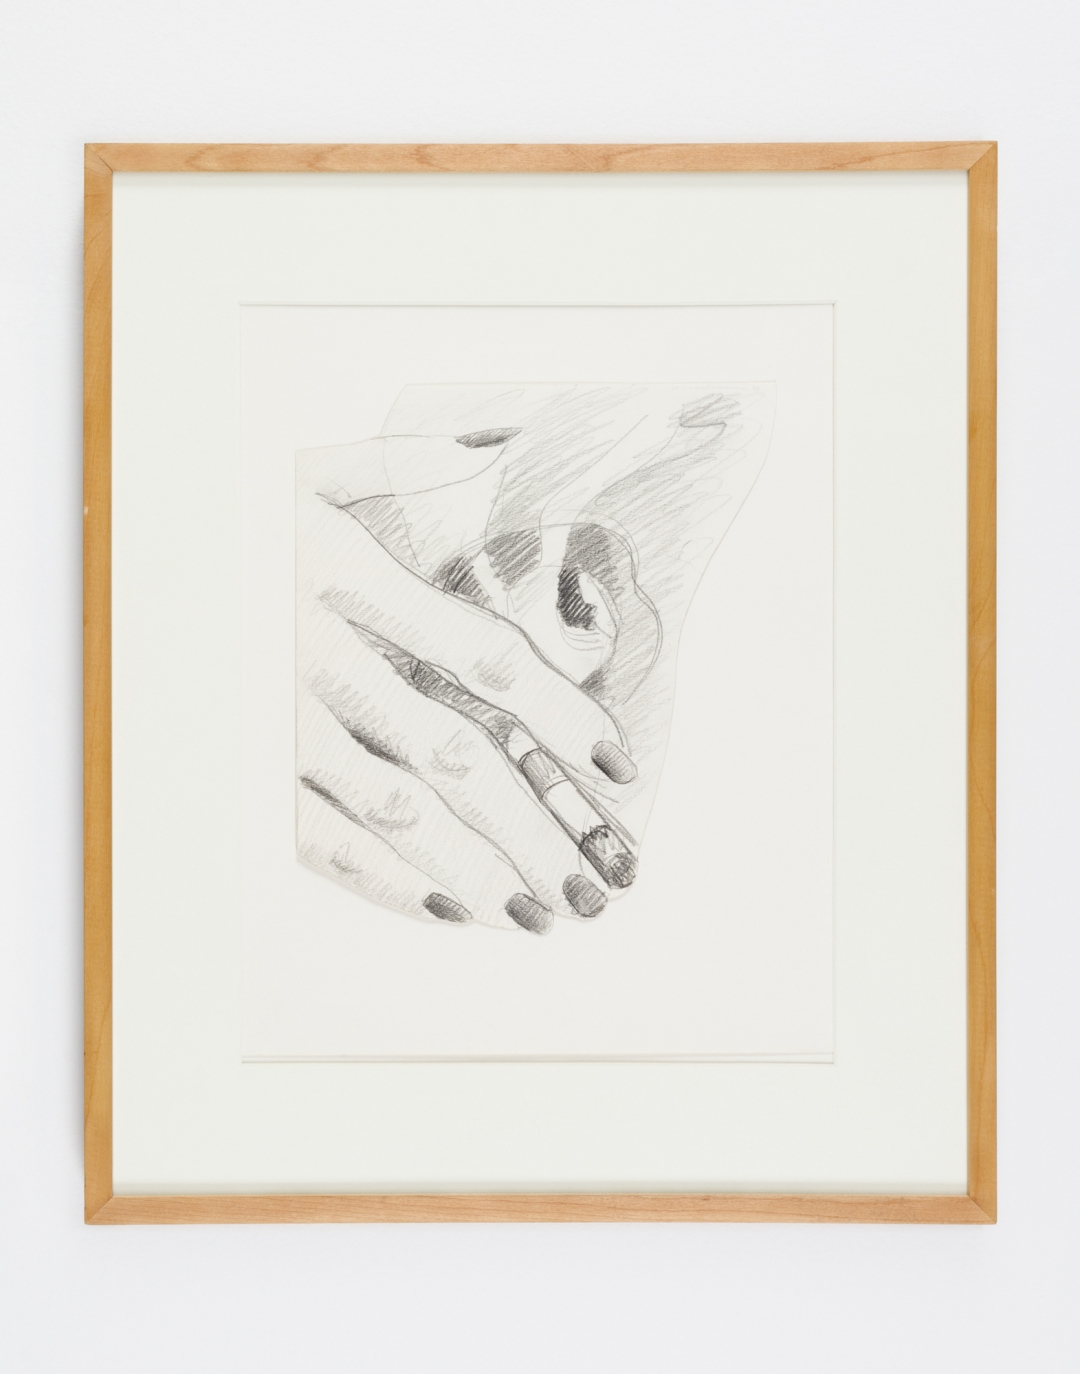 Tom Wesselmann, <i>Technical Drawing for Smoker</i>, 1973, Pencil on Bristol board, 9 3/4 x 8 1/2 inches (24.8 x 21.6 cm)